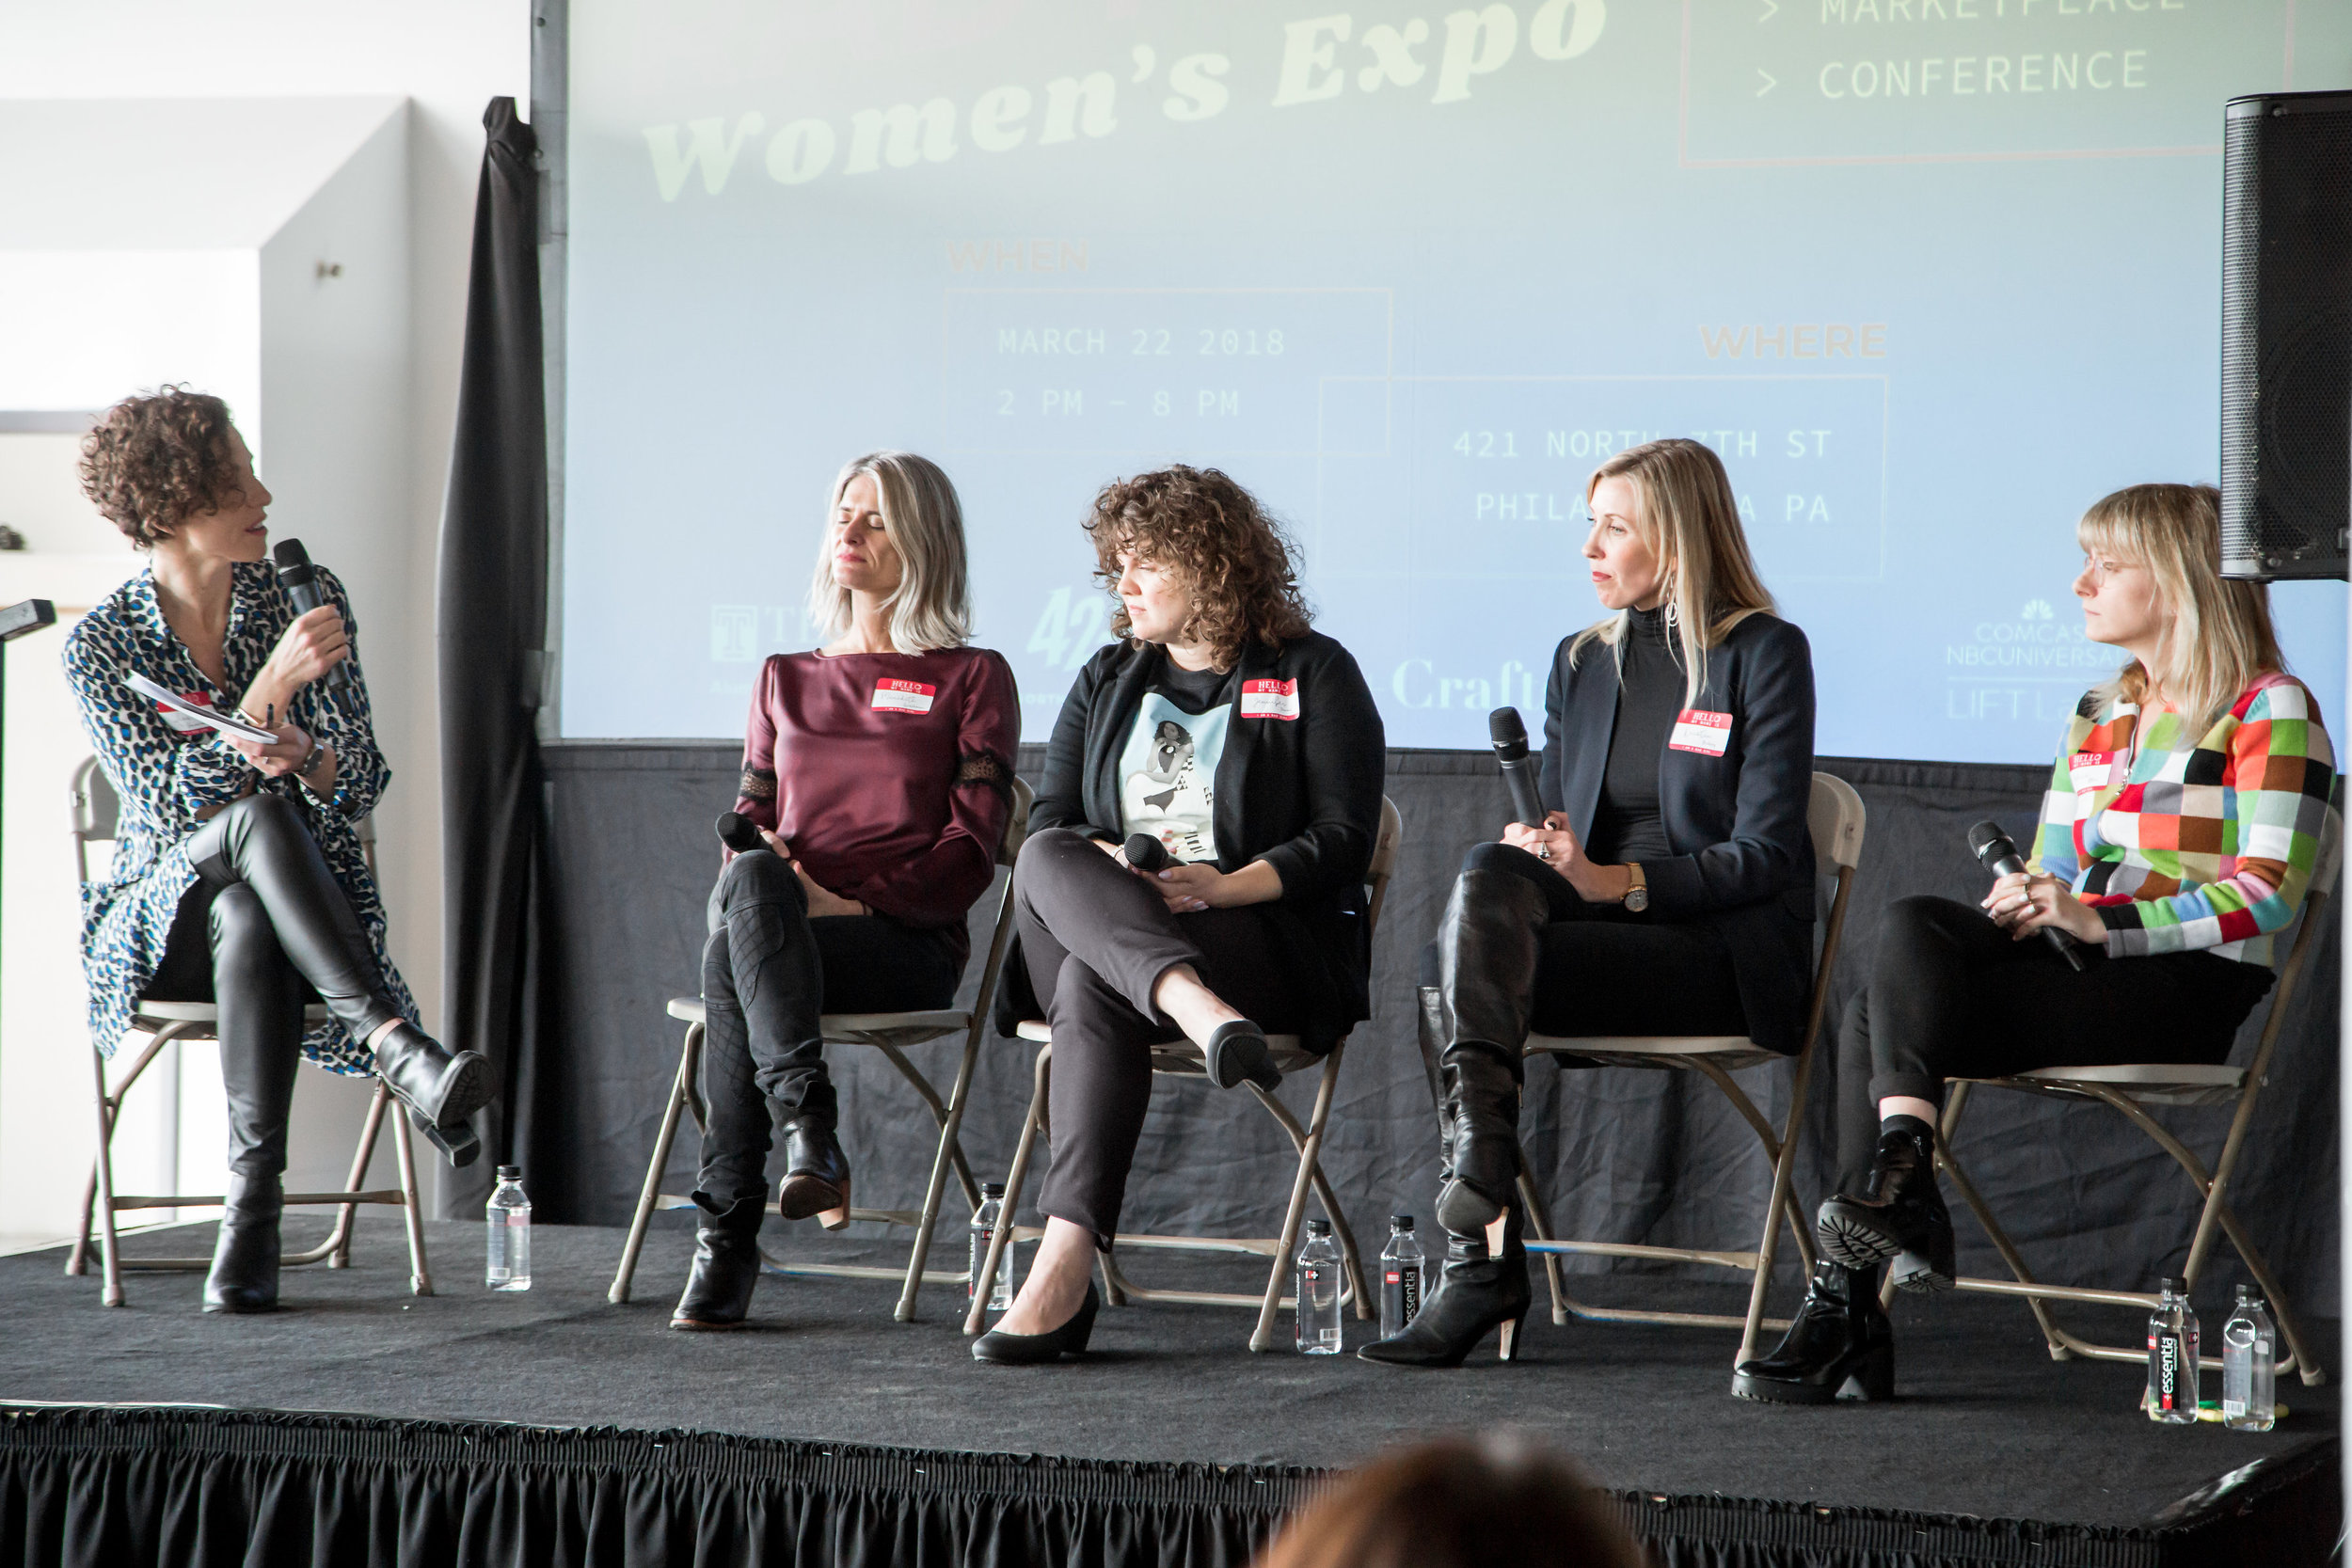  Everything You Need To Know About Networking: Moderator Lisa Vaccarelli, AVP Alumni Relations, Temple University. Meredith Waldman, Founder of Rally. Jennifer Devor, Director of Marketing, Campus Philly.&nbsp;Kristin Dudley, Founder of Co-Create. Re